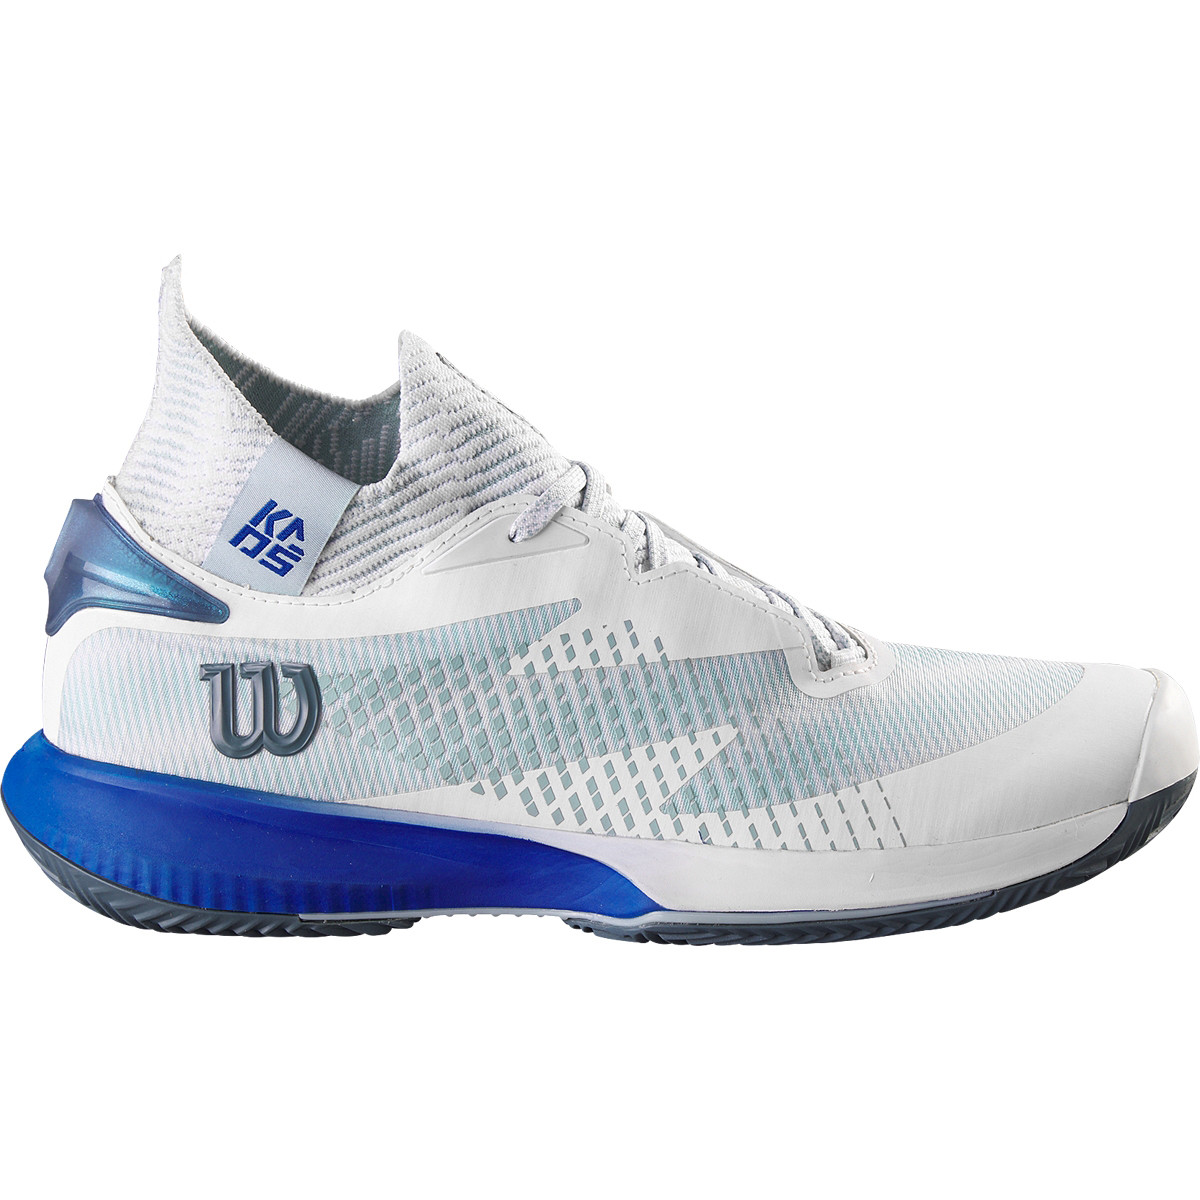 WILSON KAOS RAPIDE SFT CLAY COURT SHOES